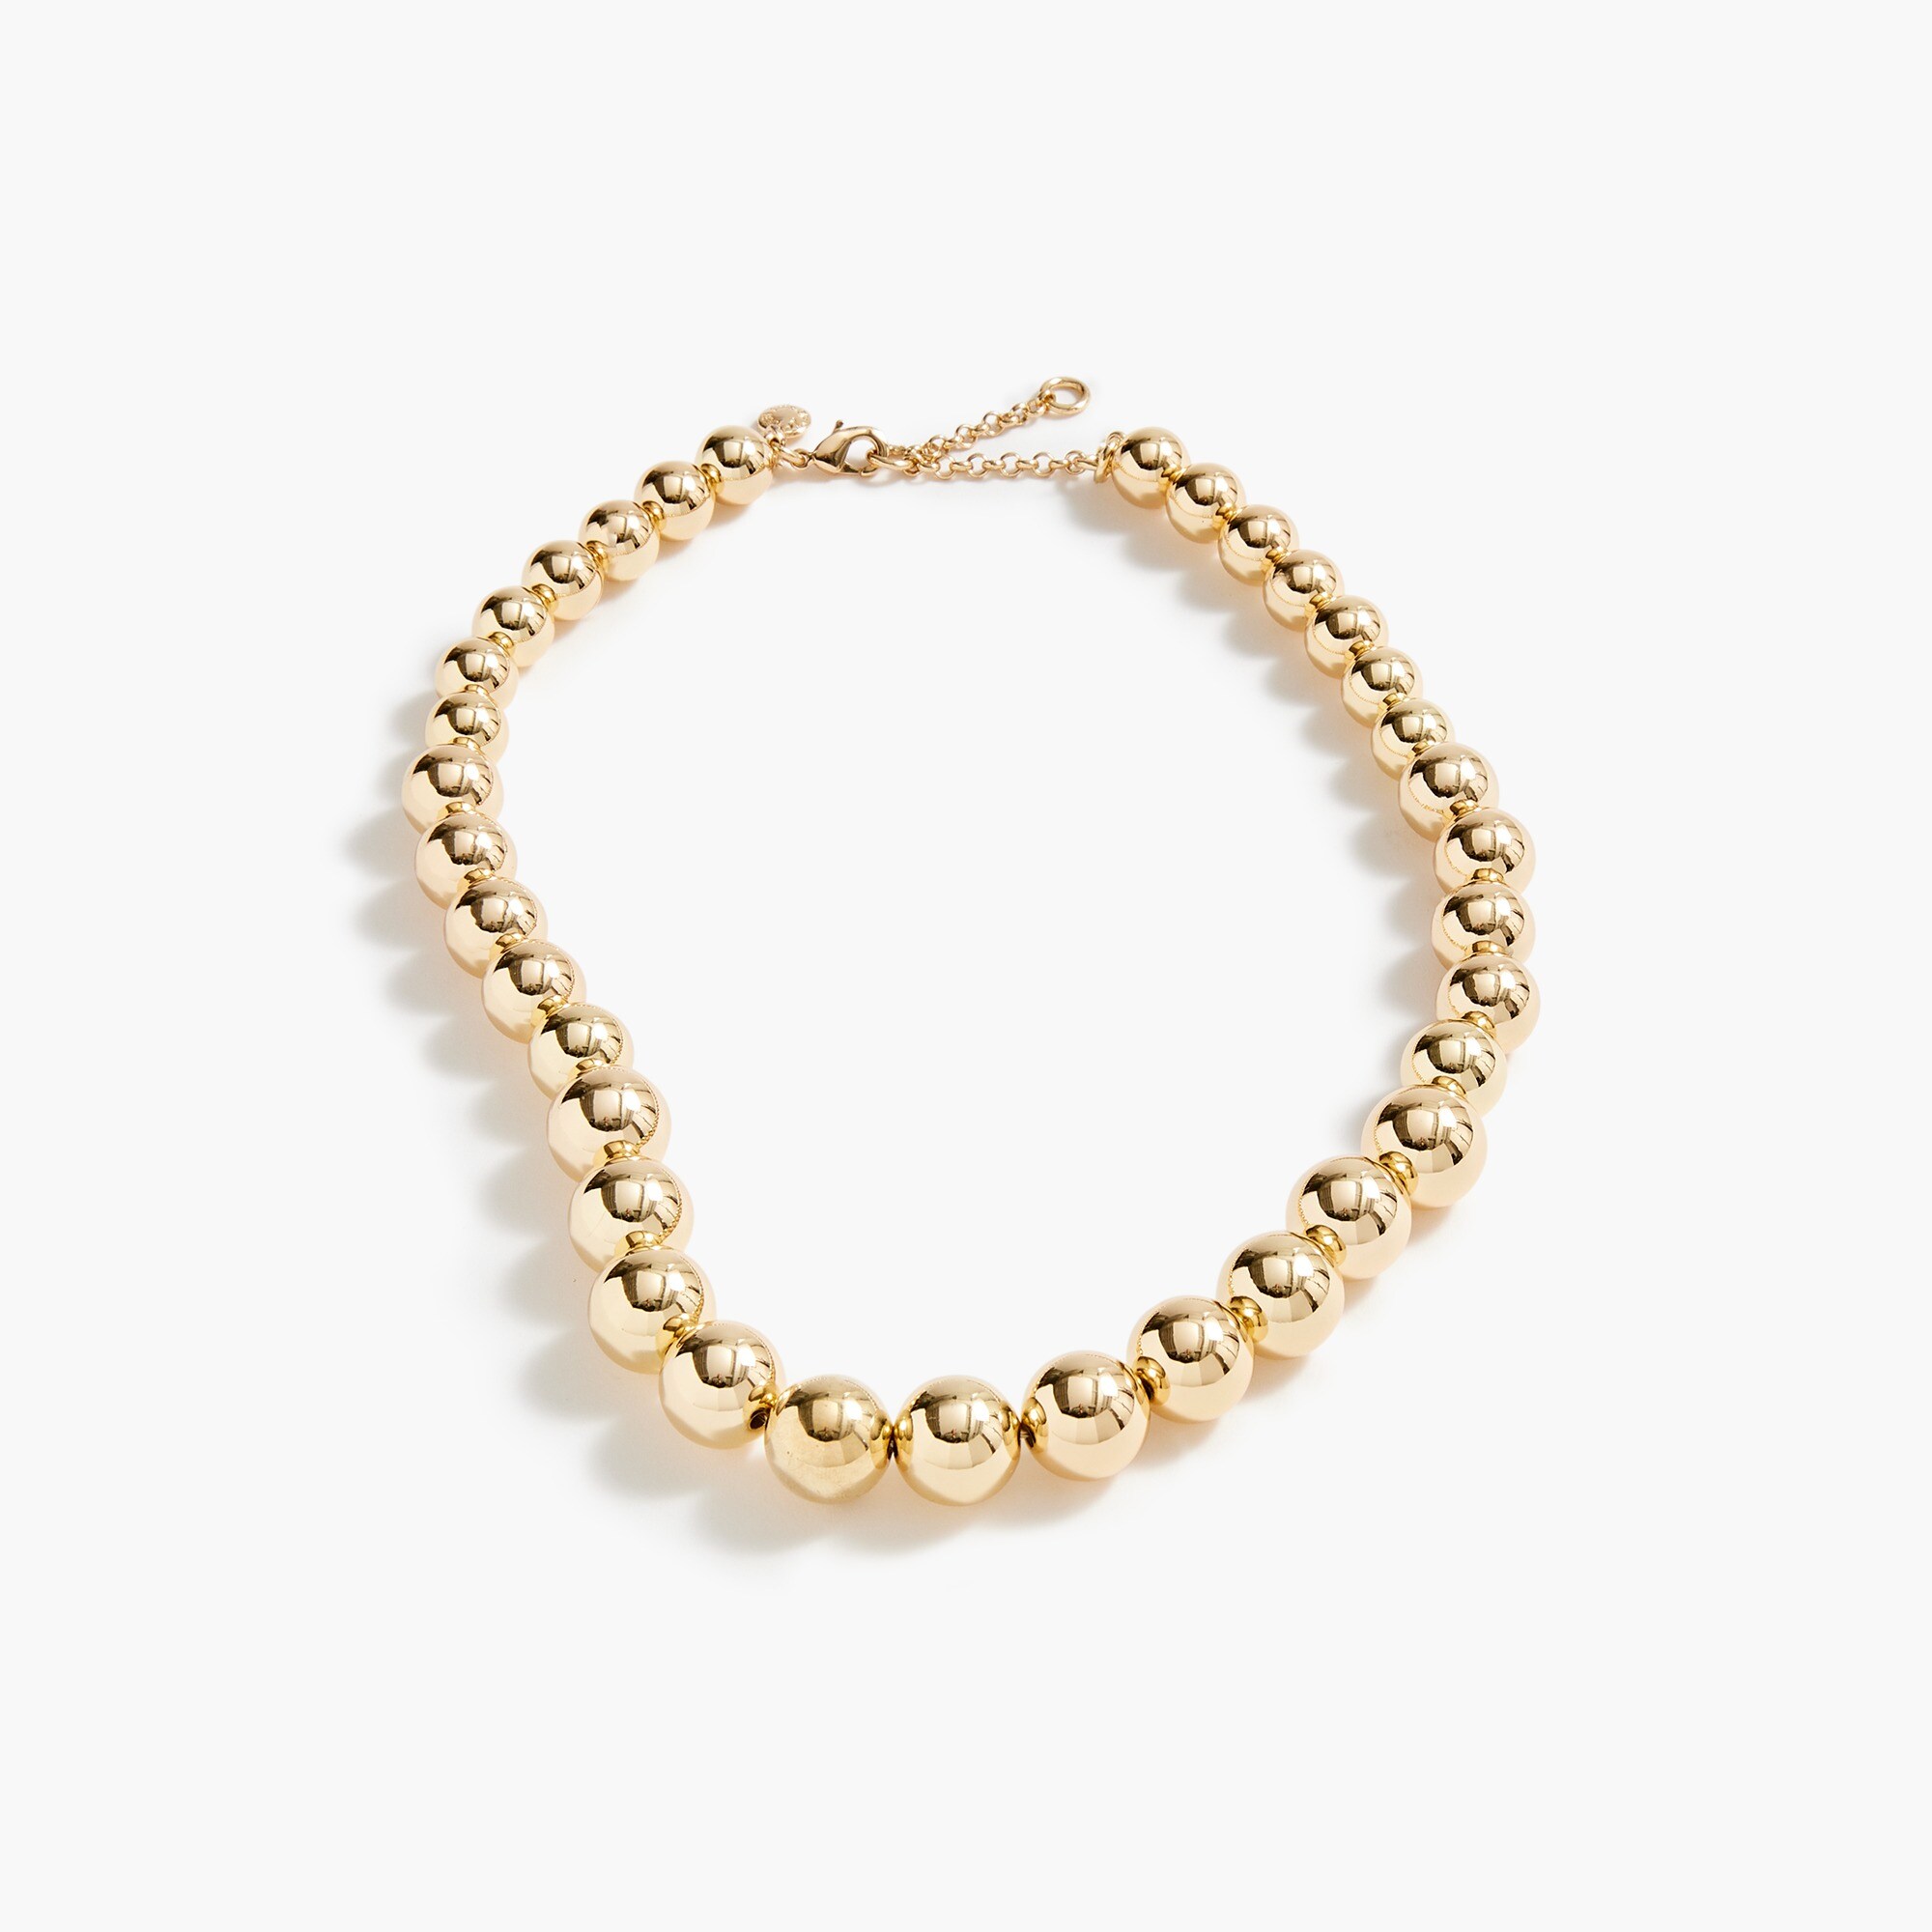  Gold bauble necklace